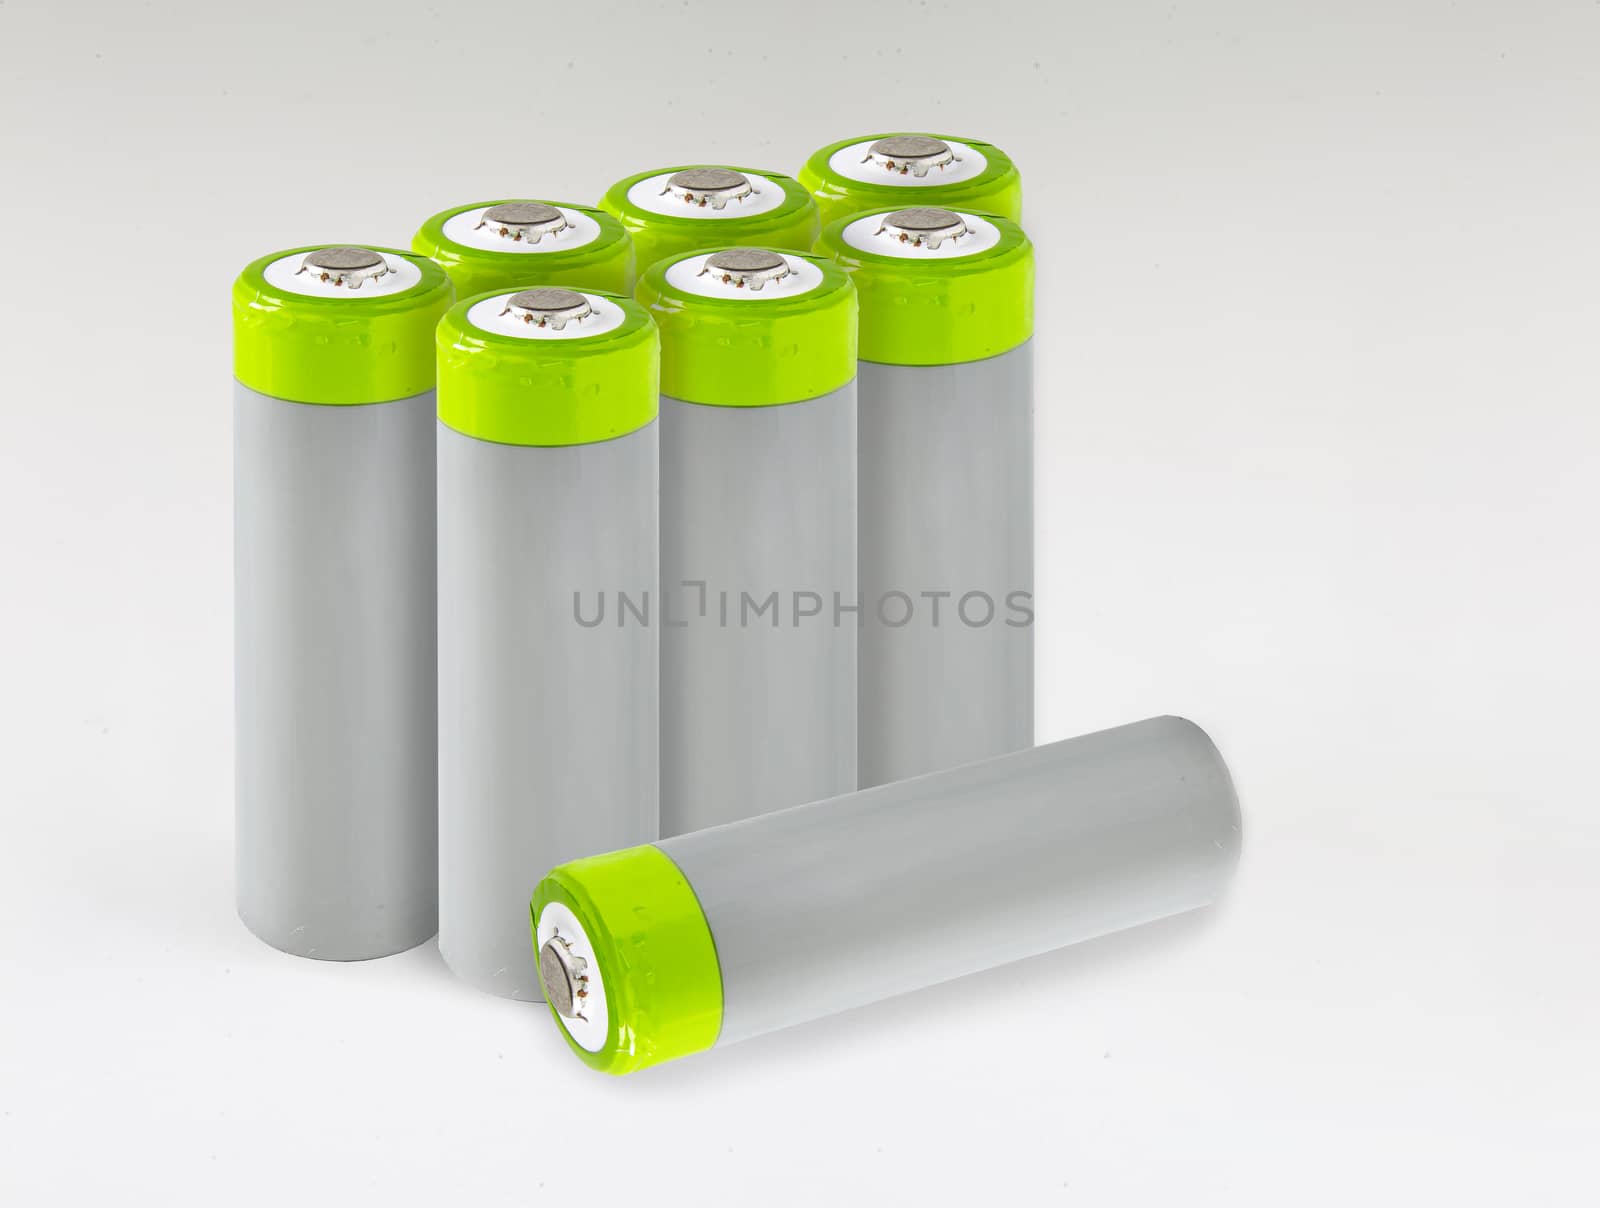 A single High-Capacity Rechargeable Battery with a shadow on a w by oasisamuel